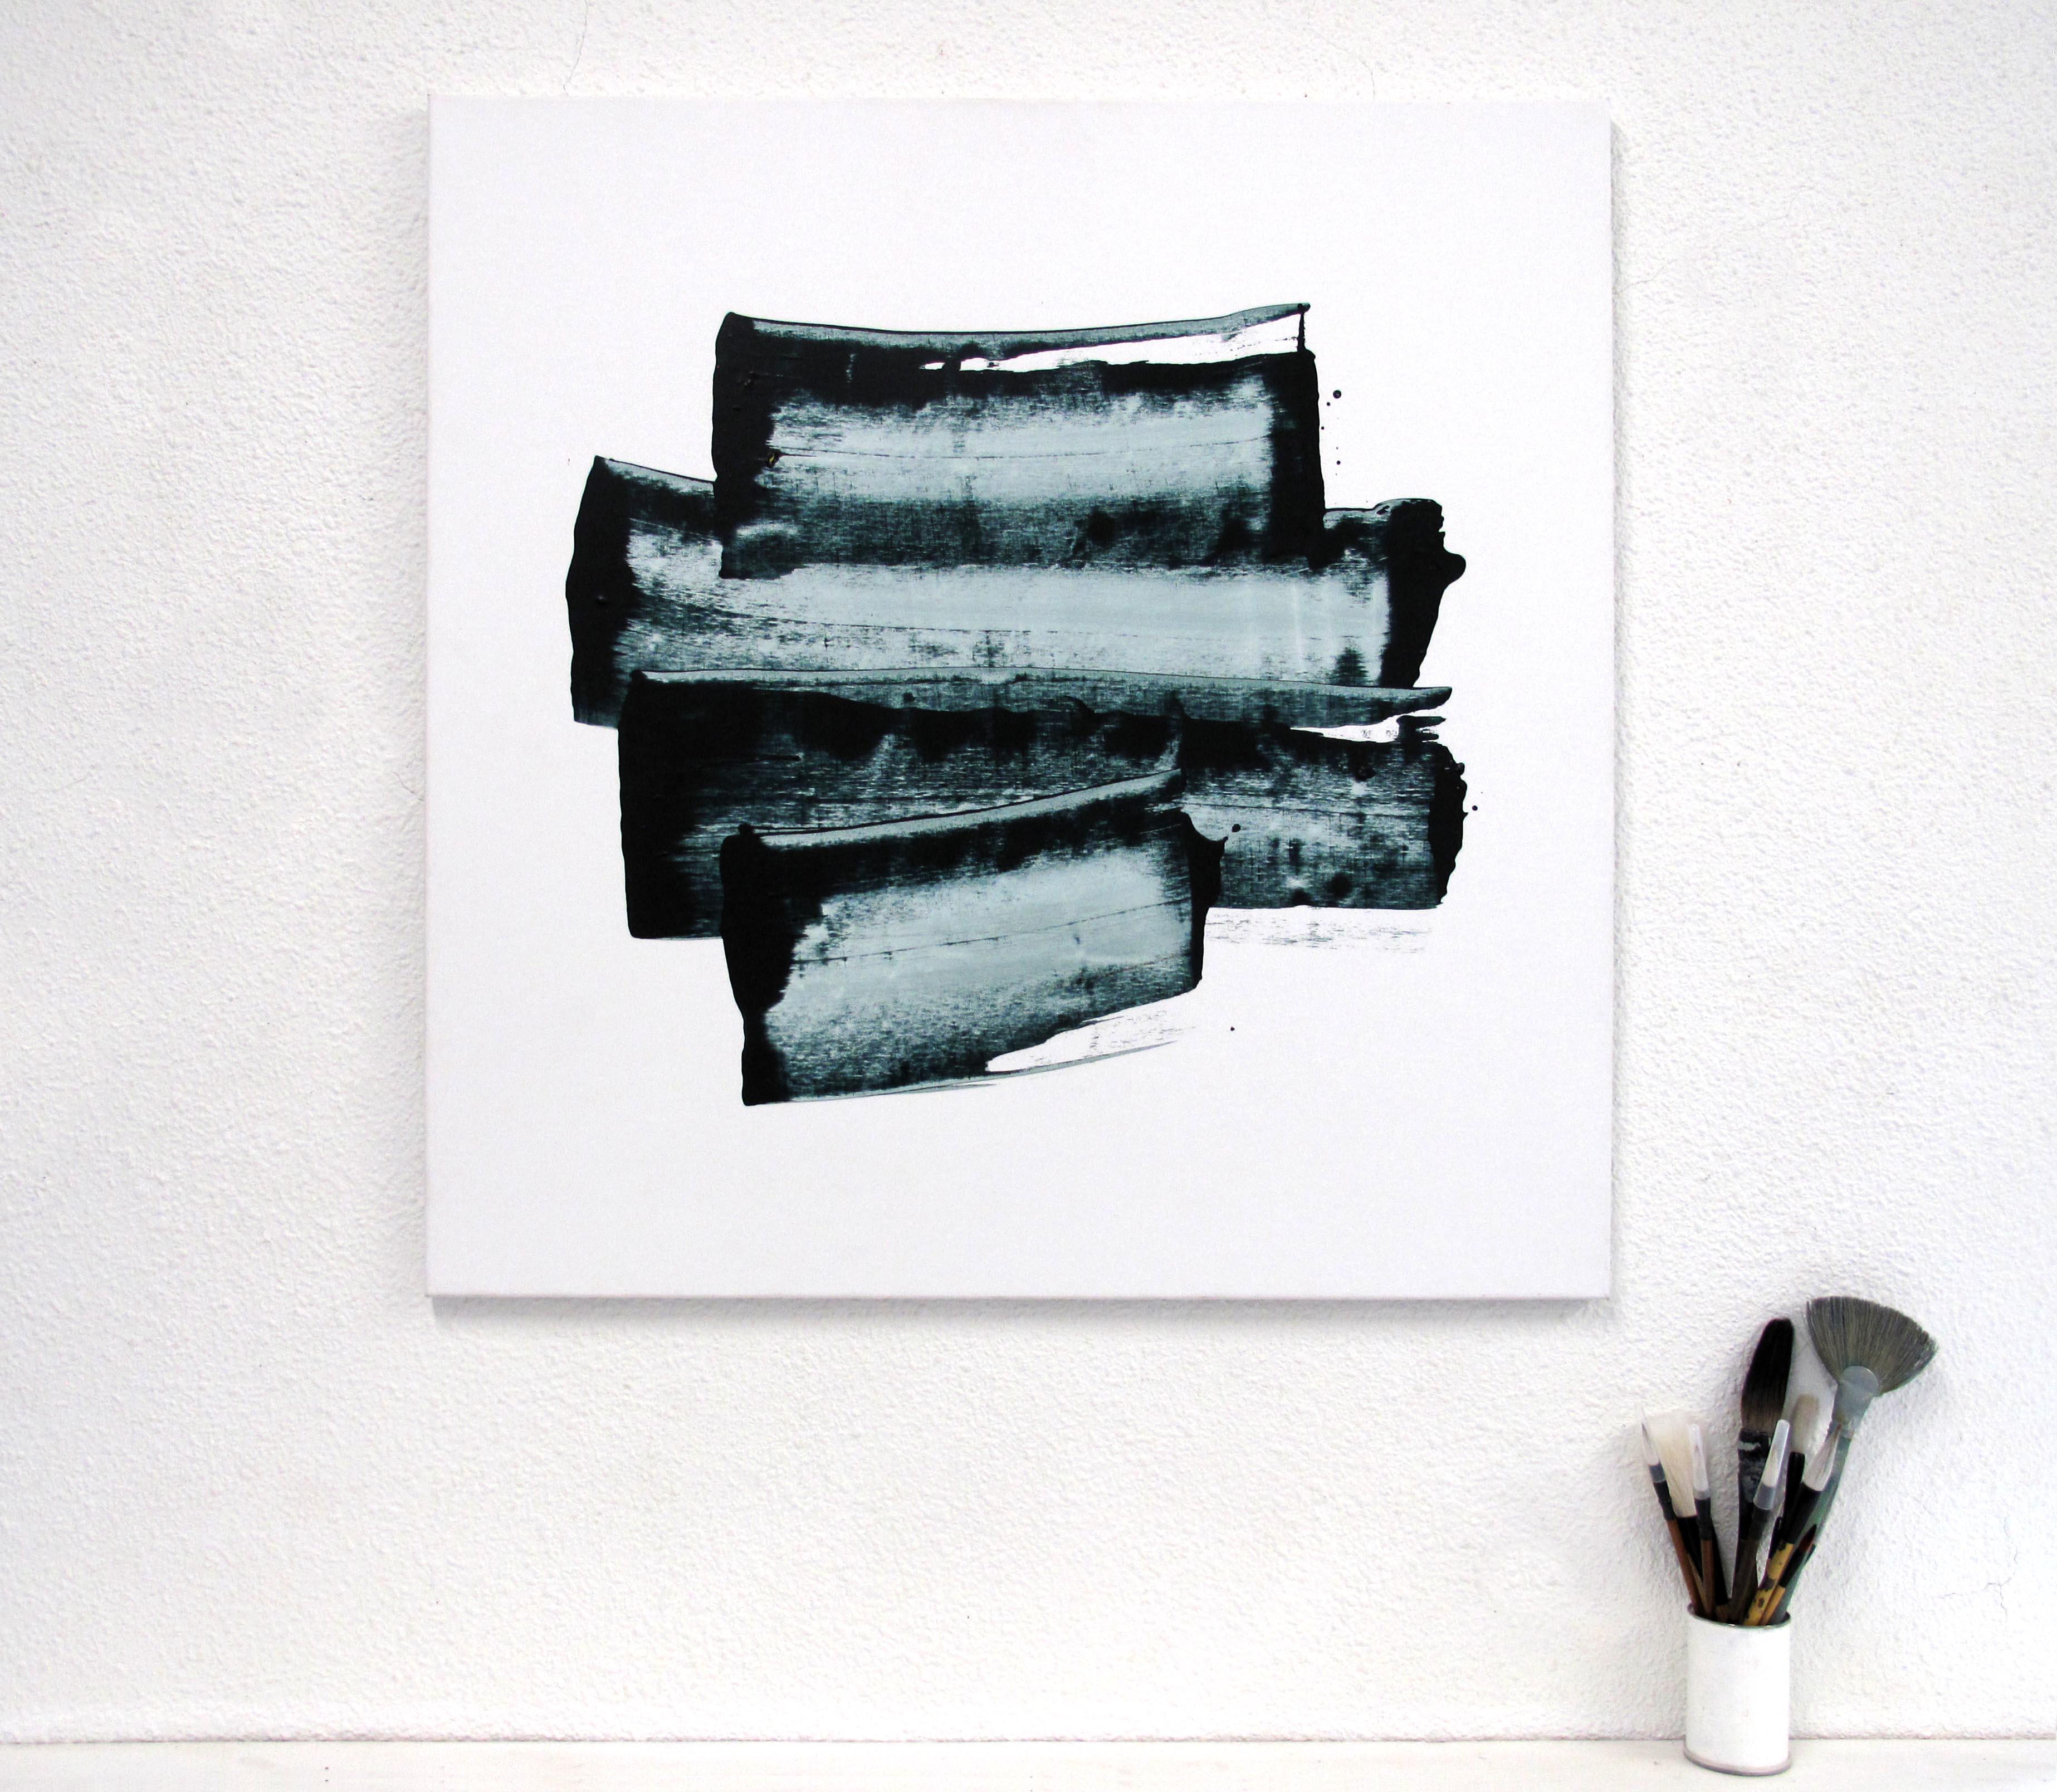 Equinox Green 02 - Abstract contemporary square painting on canvas, textured - Black Abstract Painting by Emma Godebska